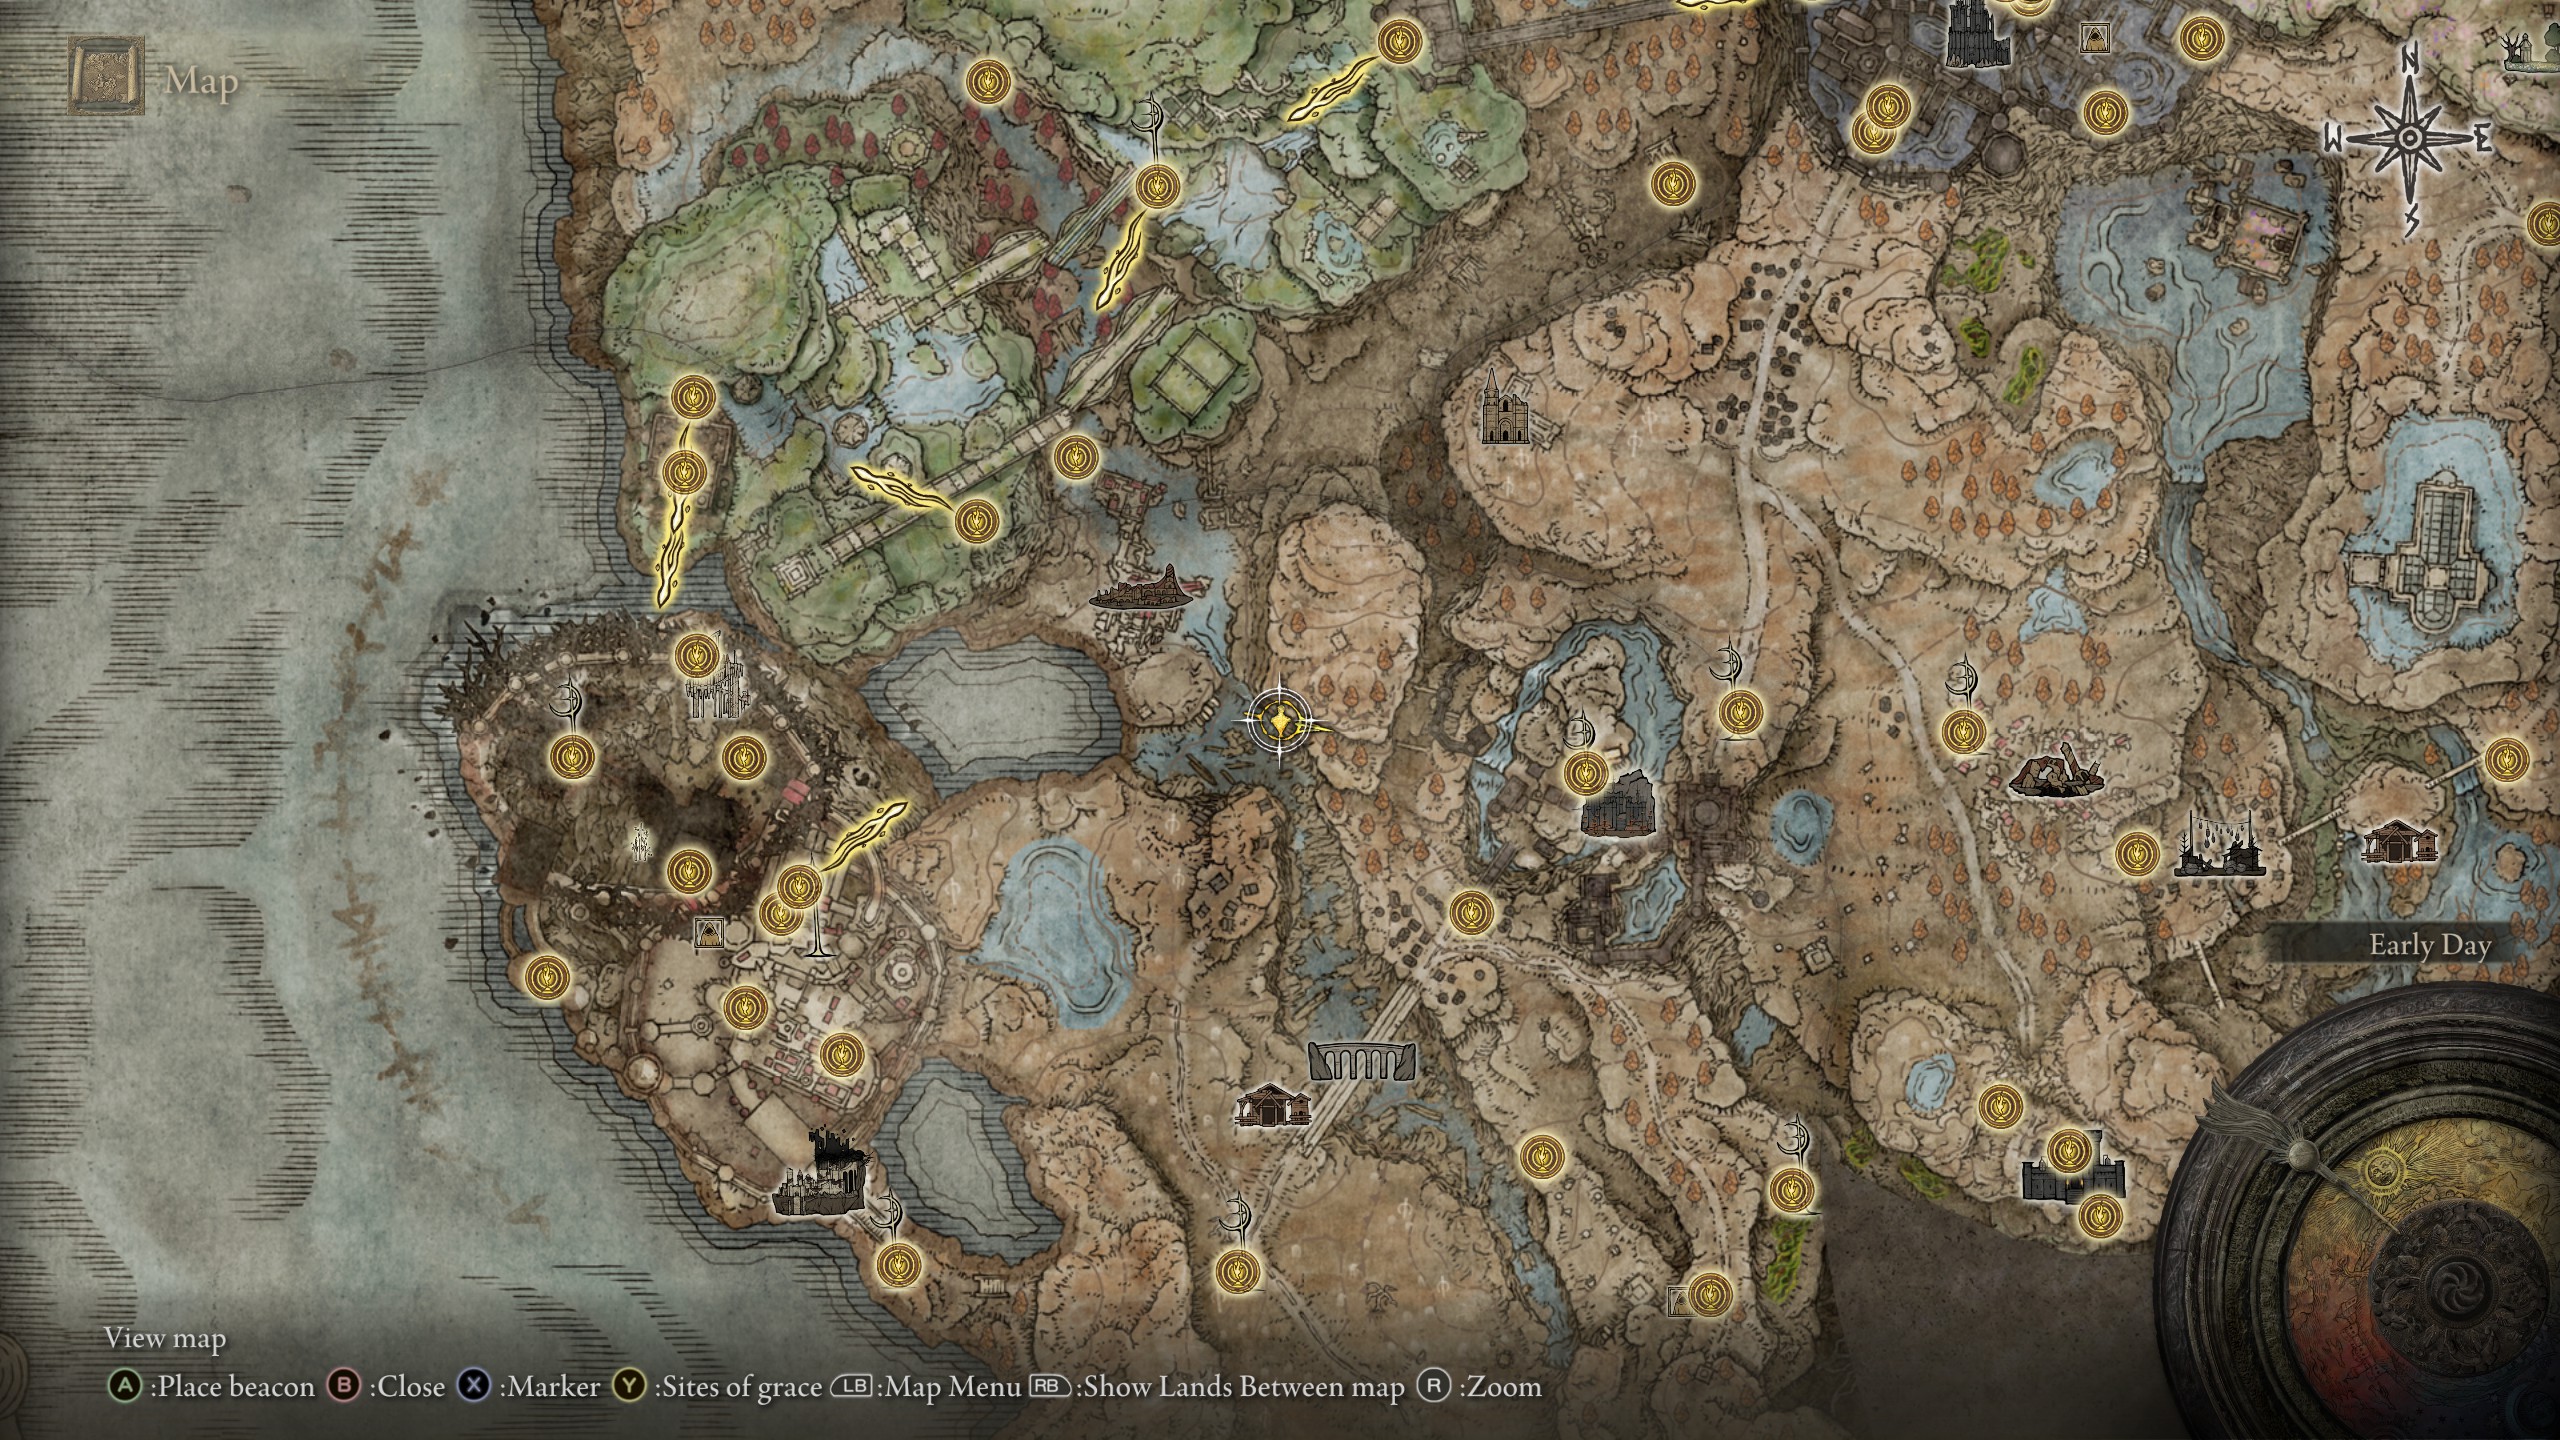 Elden Ring painting locations - Northern Nameless Mausoleum